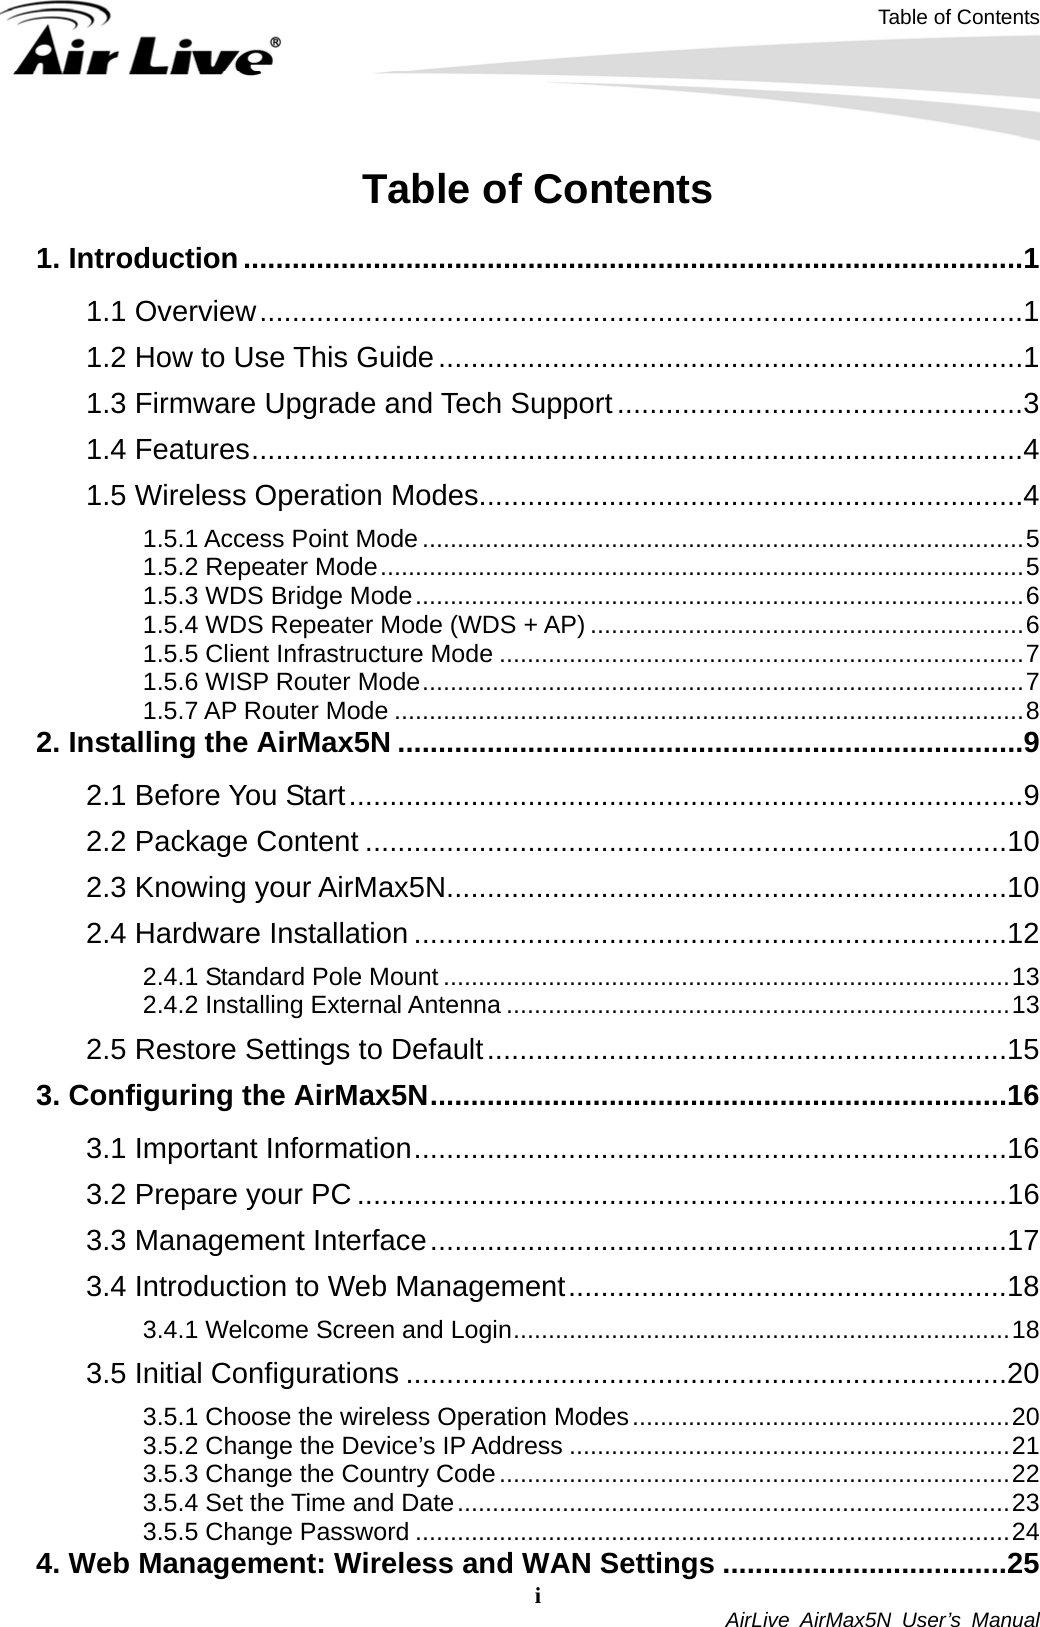 Table of Contents i  AirLive AirMax5N User’s Manual Table of Contents  1. Introduction................................................................................................1 1.1 Overview..............................................................................................1 1.2 How to Use This Guide........................................................................1 1.3 Firmware Upgrade and Tech Support..................................................3 1.4 Features...............................................................................................4 1.5 Wireless Operation Modes...................................................................4 1.5.1 Access Point Mode ......................................................................................5 1.5.2 Repeater Mode............................................................................................5 1.5.3 WDS Bridge Mode.......................................................................................6 1.5.4 WDS Repeater Mode (WDS + AP) ..............................................................6 1.5.5 Client Infrastructure Mode ...........................................................................7 1.5.6 WISP Router Mode......................................................................................7 1.5.7 AP Router Mode ..........................................................................................8 2. Installing the AirMax5N .............................................................................9 2.1 Before You Start...................................................................................9 2.2 Package Content ...............................................................................10 2.3 Knowing your AirMax5N.....................................................................10 2.4 Hardware Installation .........................................................................12 2.4.1 Standard Pole Mount .................................................................................13 2.4.2 Installing External Antenna ........................................................................13 2.5 Restore Settings to Default................................................................15 3. Configuring the AirMax5N.......................................................................16 3.1 Important Information.........................................................................16 3.2 Prepare your PC ................................................................................16 3.3 Management Interface.......................................................................17 3.4 Introduction to Web Management......................................................18 3.4.1 Welcome Screen and Login.......................................................................18 3.5 Initial Configurations ..........................................................................20 3.5.1 Choose the wireless Operation Modes......................................................20 3.5.2 Change the Device’s IP Address ...............................................................21 3.5.3 Change the Country Code.........................................................................22 3.5.4 Set the Time and Date...............................................................................23 3.5.5 Change Password .....................................................................................24 4. Web Management: Wireless and WAN Settings ...................................25 